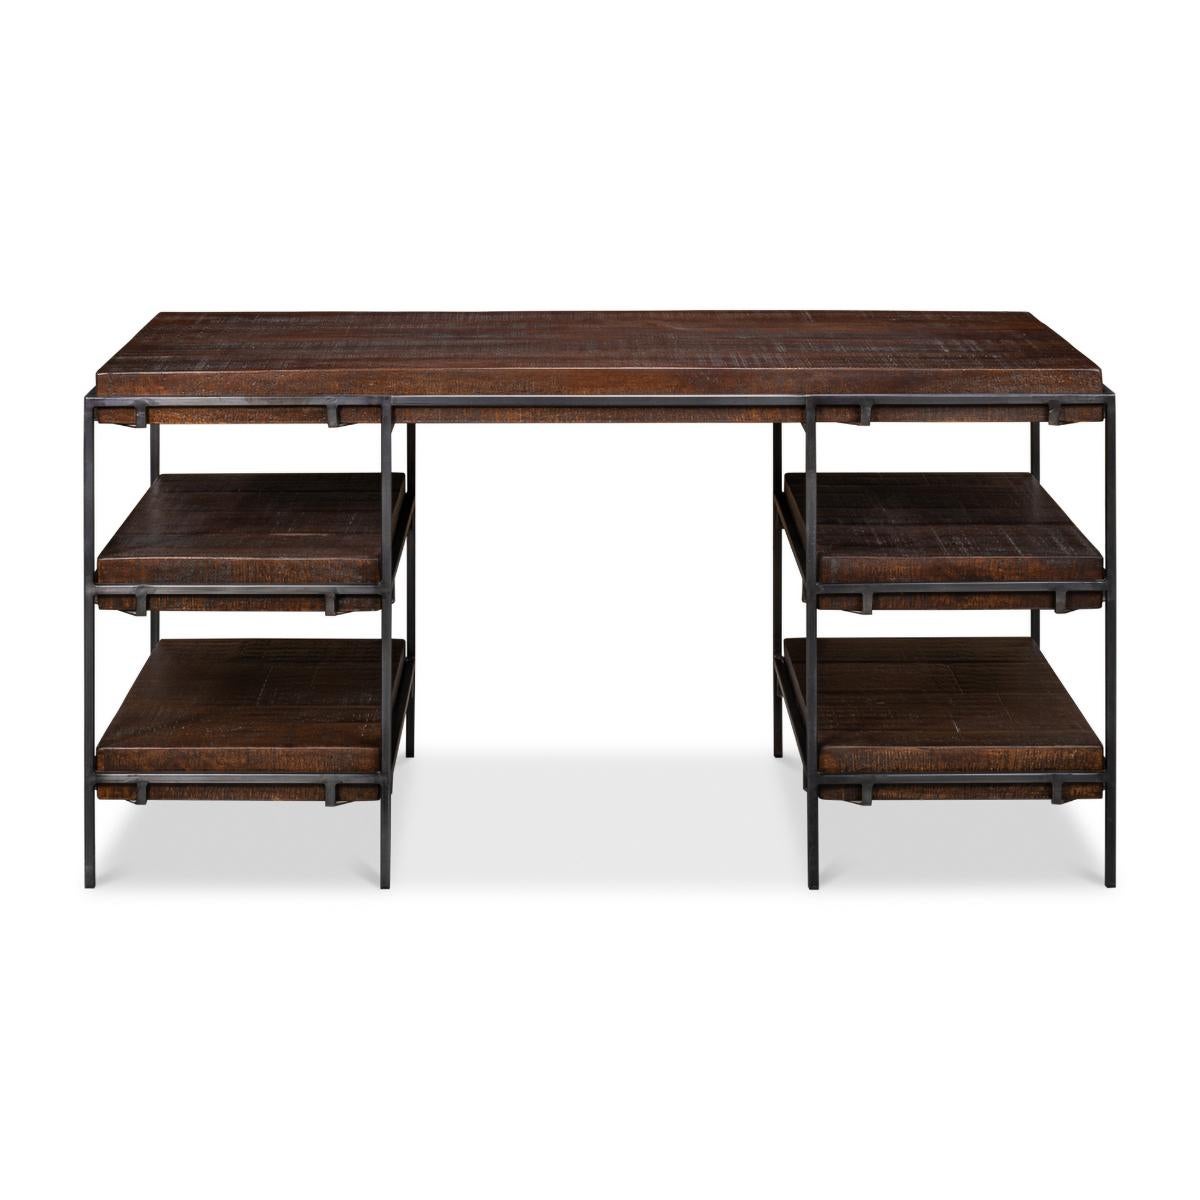 A modern iron and mango wood Industrial desk finished in our dark ascot finish, with a bold style and design. An ideal desk in a home office or corporate environment.

Dimensions: 60